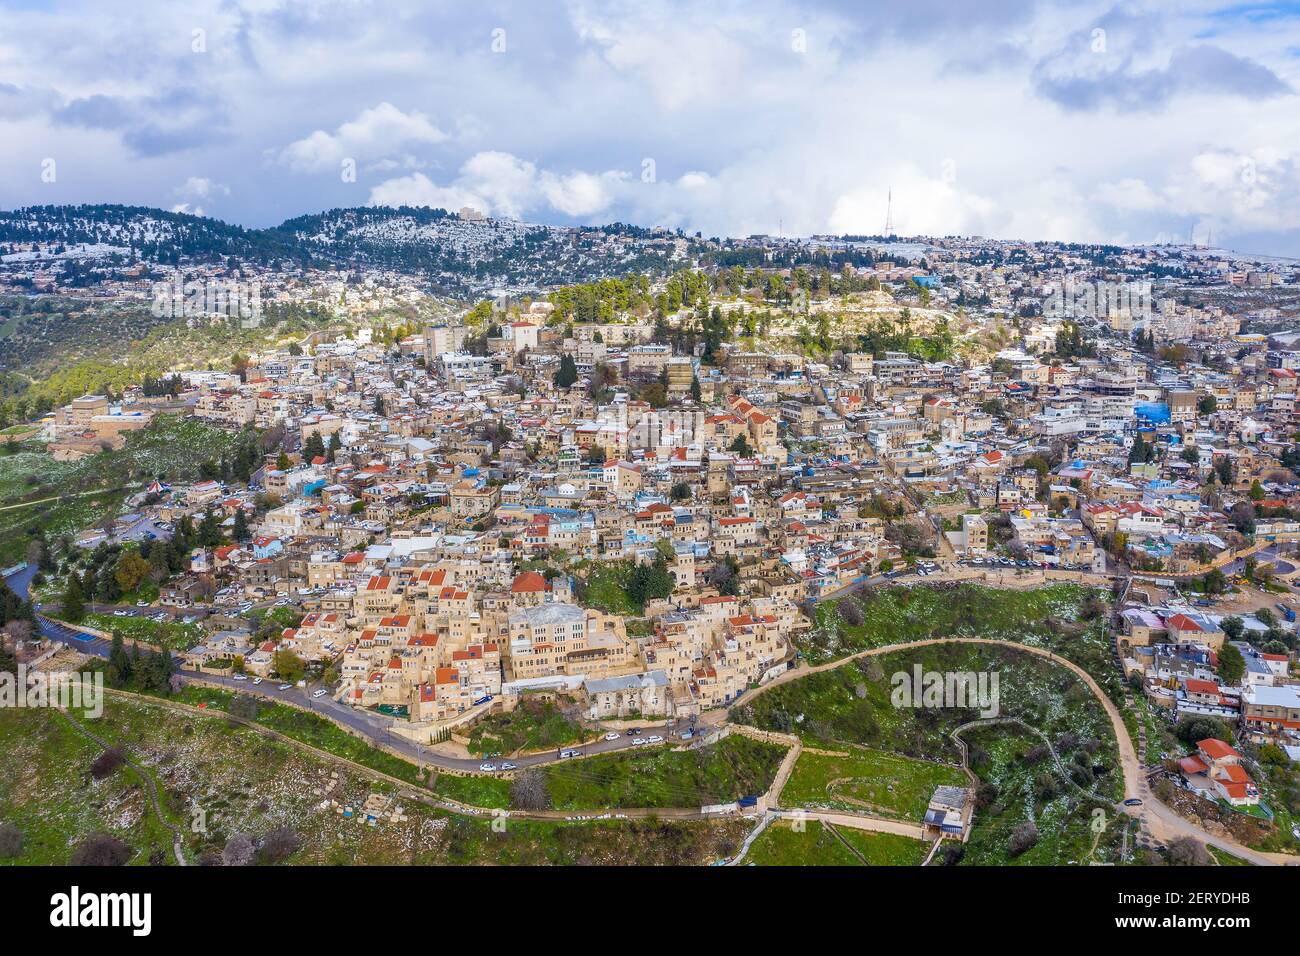 Safed old Jewish quarter houses, with light snow covering rooftops, Aerial view. Stock Photo